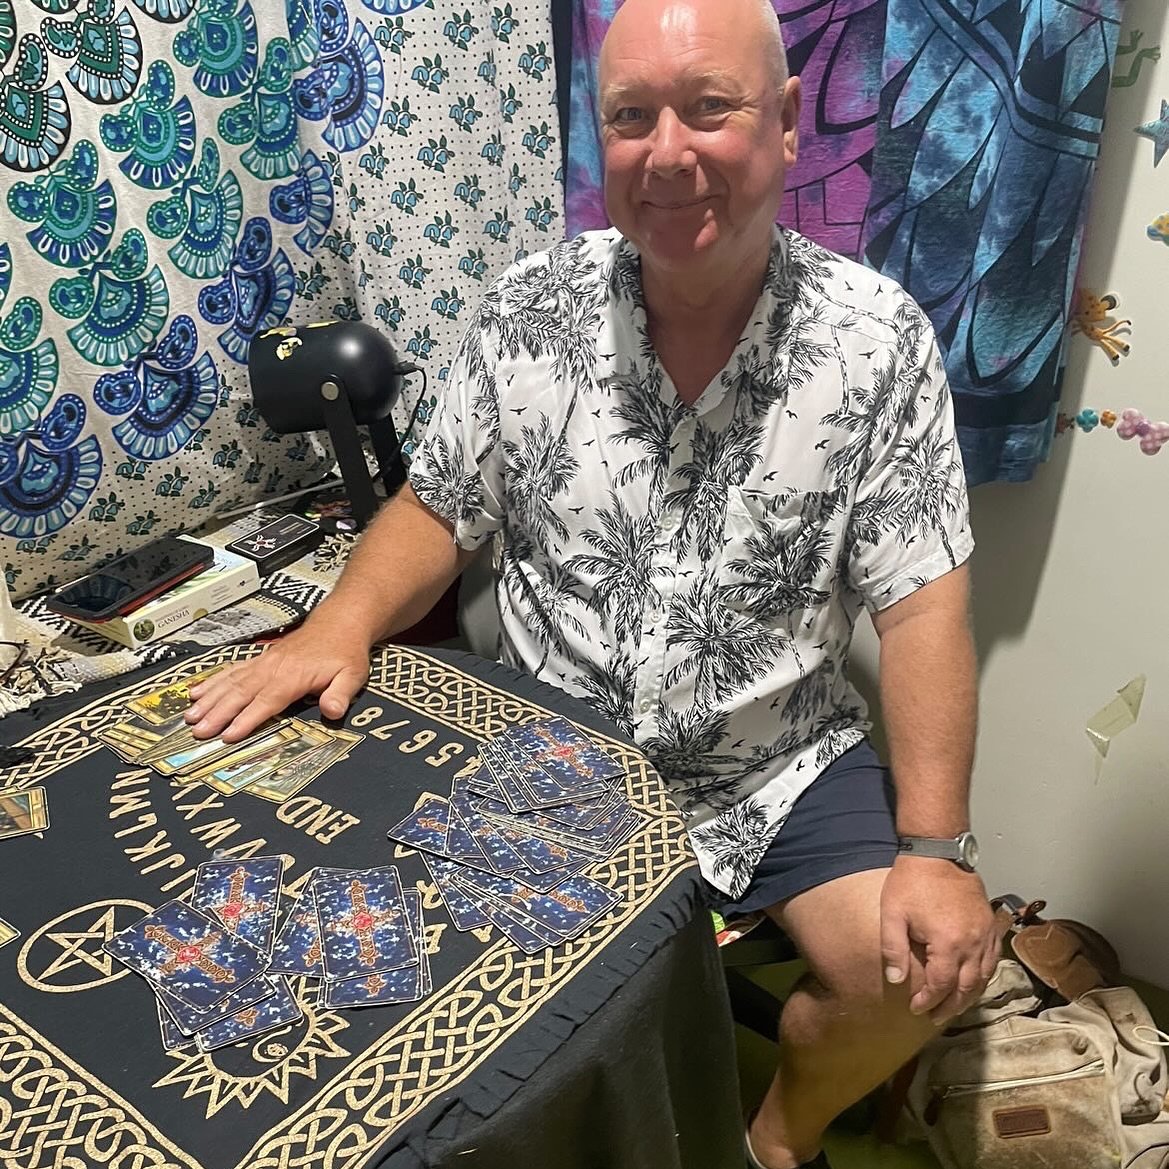 everybody welcome steve! 👋🏻 

steve is our new sunday reader in-store! 🔮

specialising in tarot card readings! a spirit will be present when you choose your cards, steve is there to help translate the meanings 😊

he will be in store from 11am-3pm